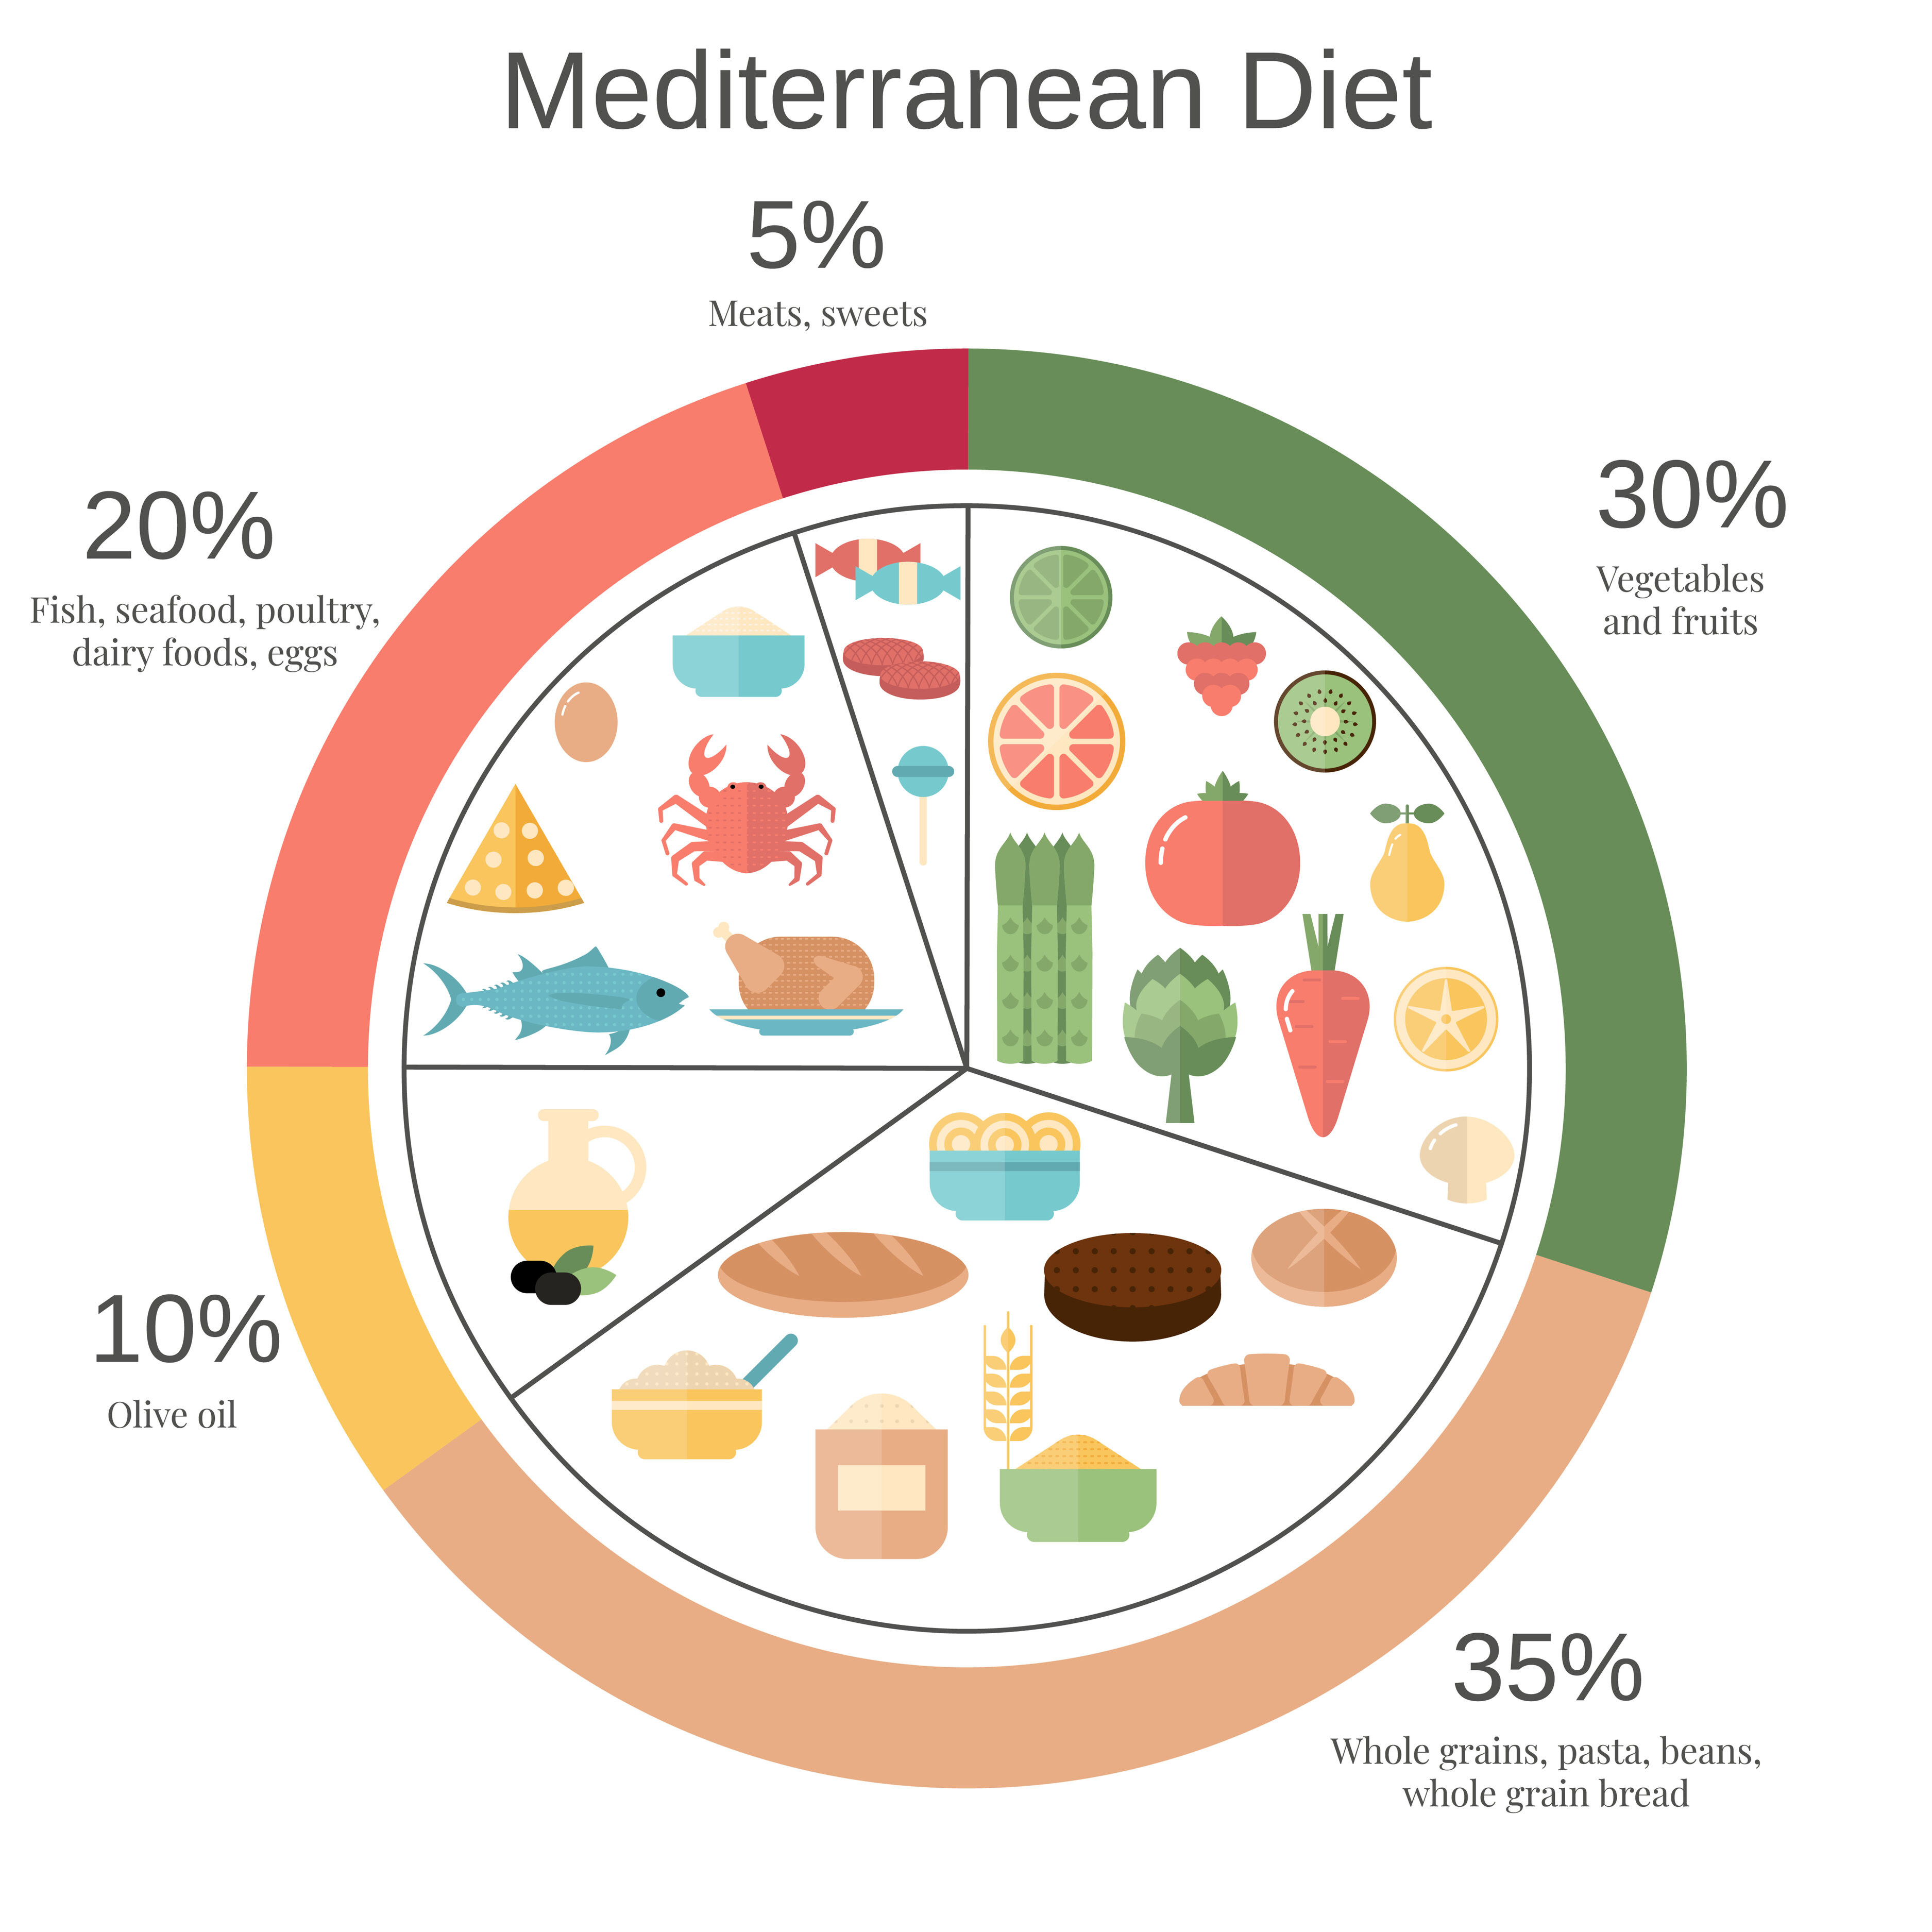 Mediterranean diet enriched with olive oil reduces symptoms of depression